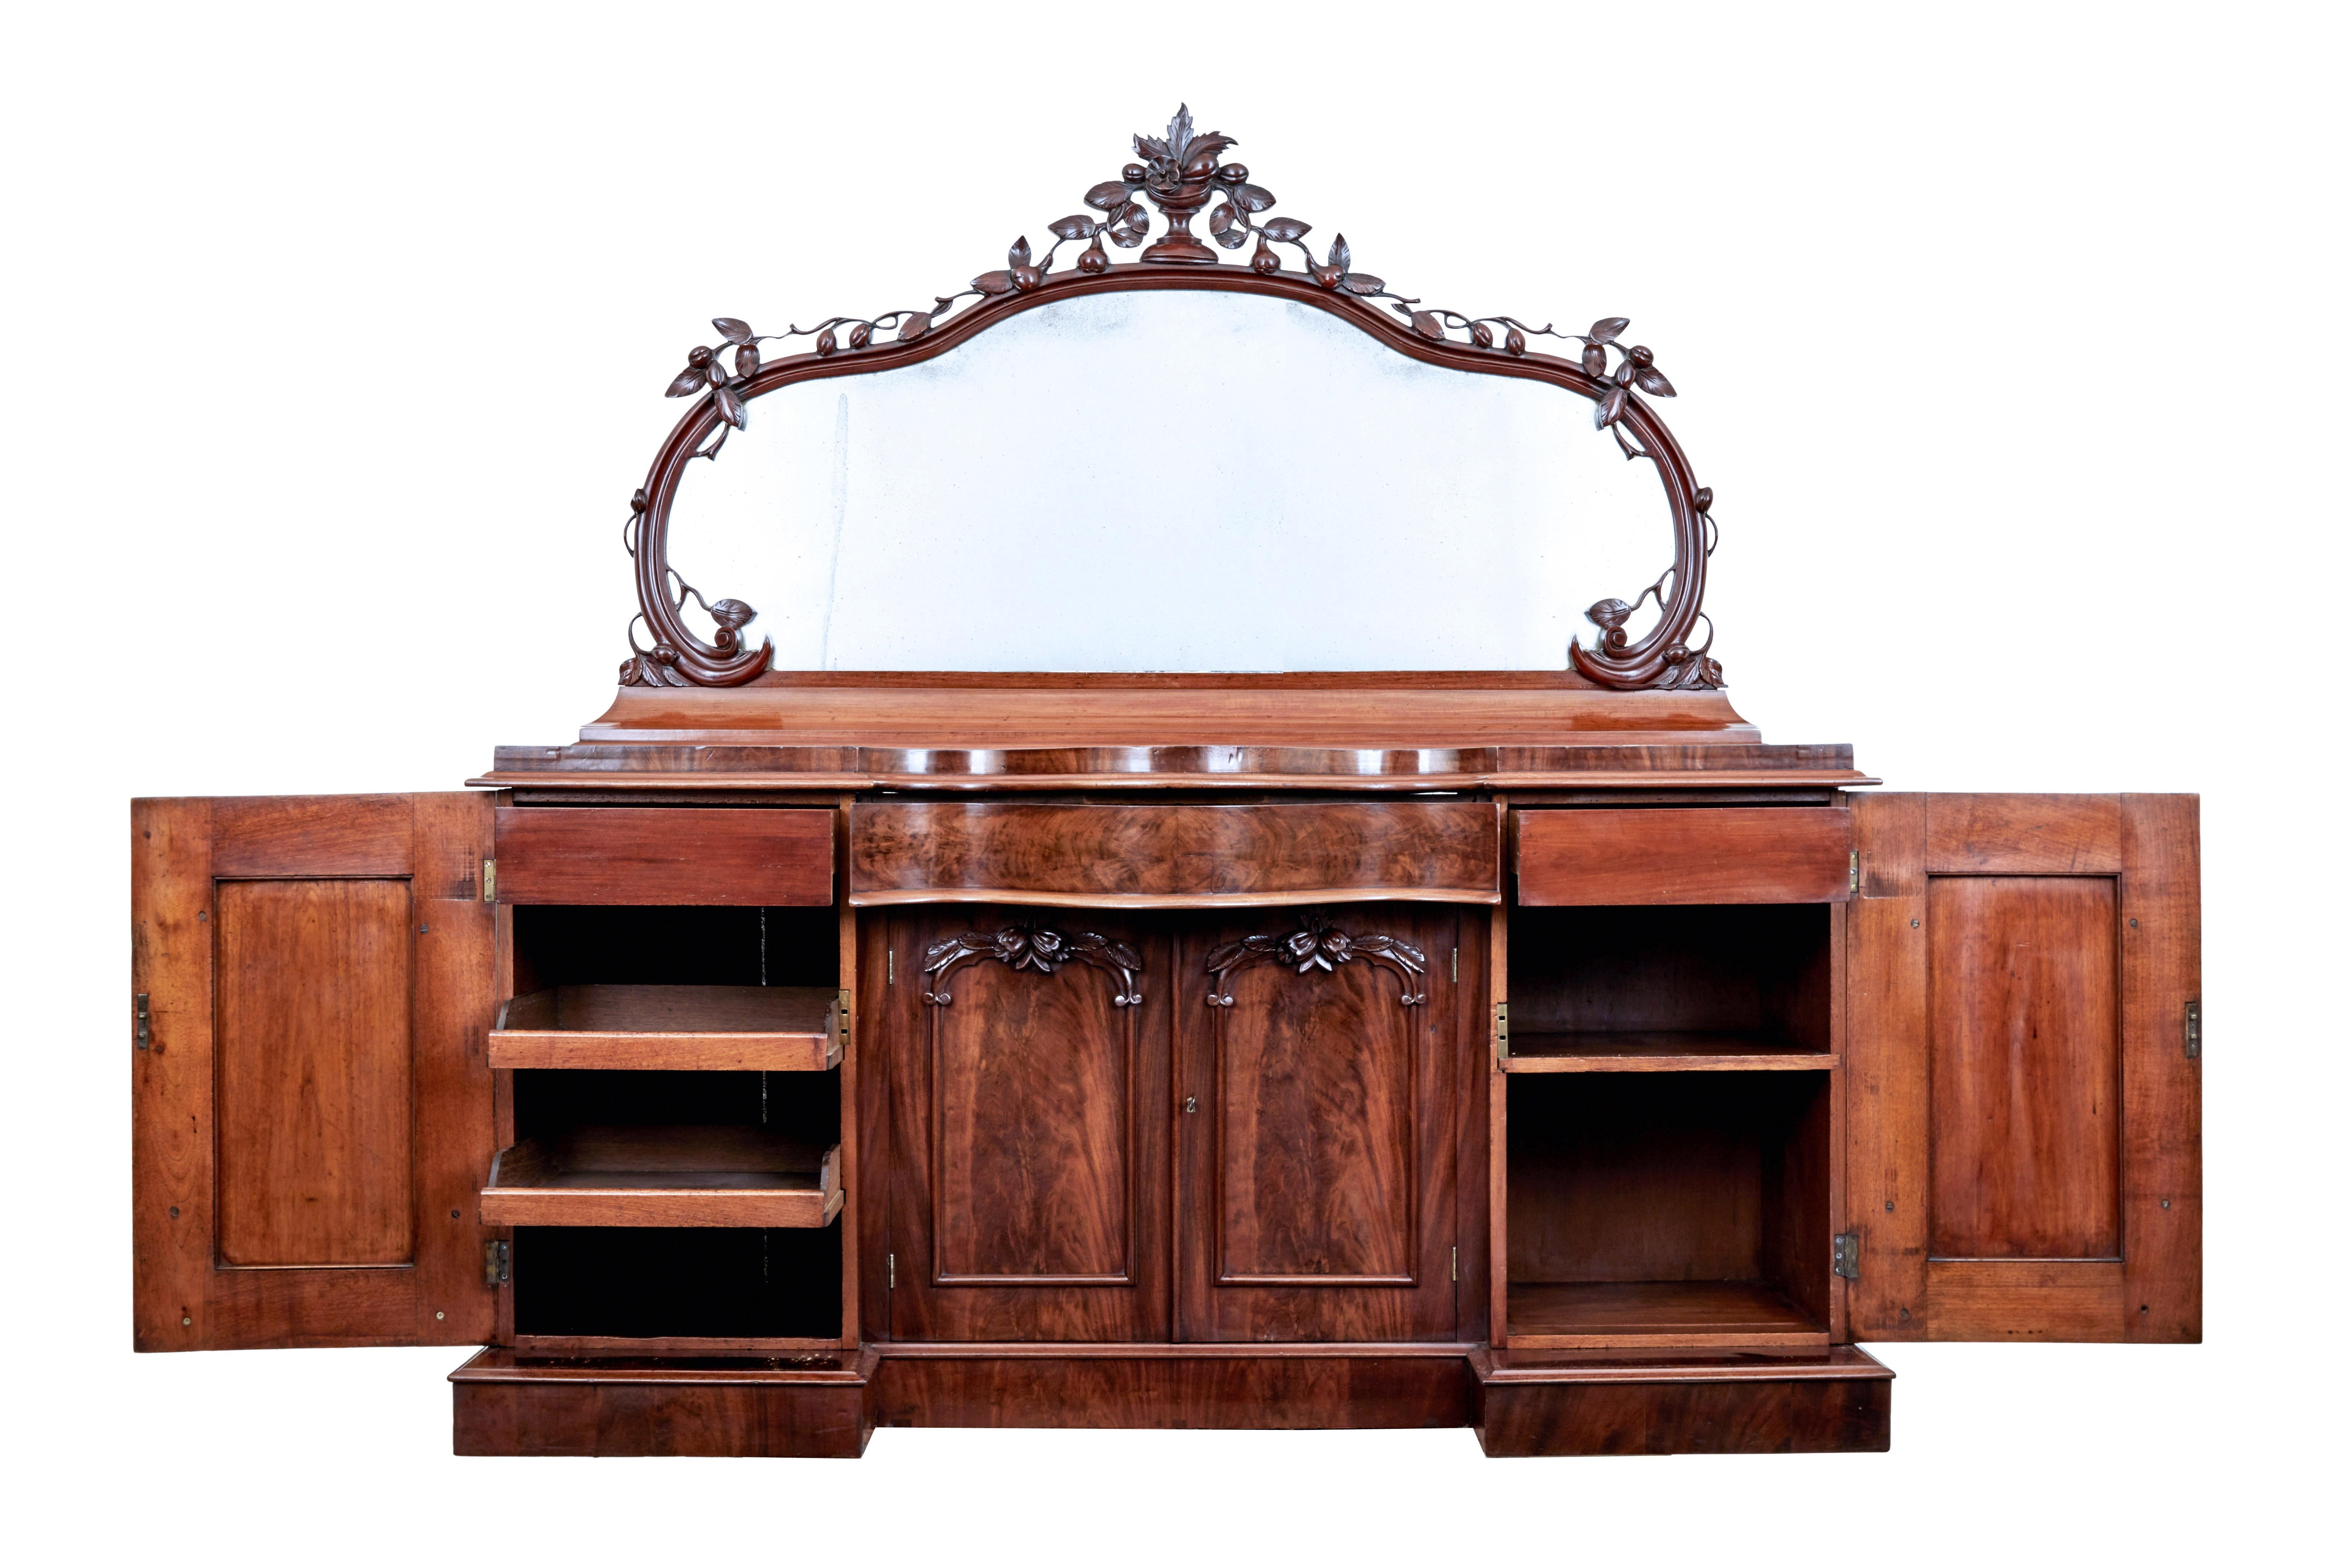 High Victorian shaped flame mahogany mirror topped sideboard circa 1860.

Fine quality 2 part sideboard. Shaped mirror with original plate, carved cup at the top with flowing leaves and fruit flowing down to the scrolled base of the